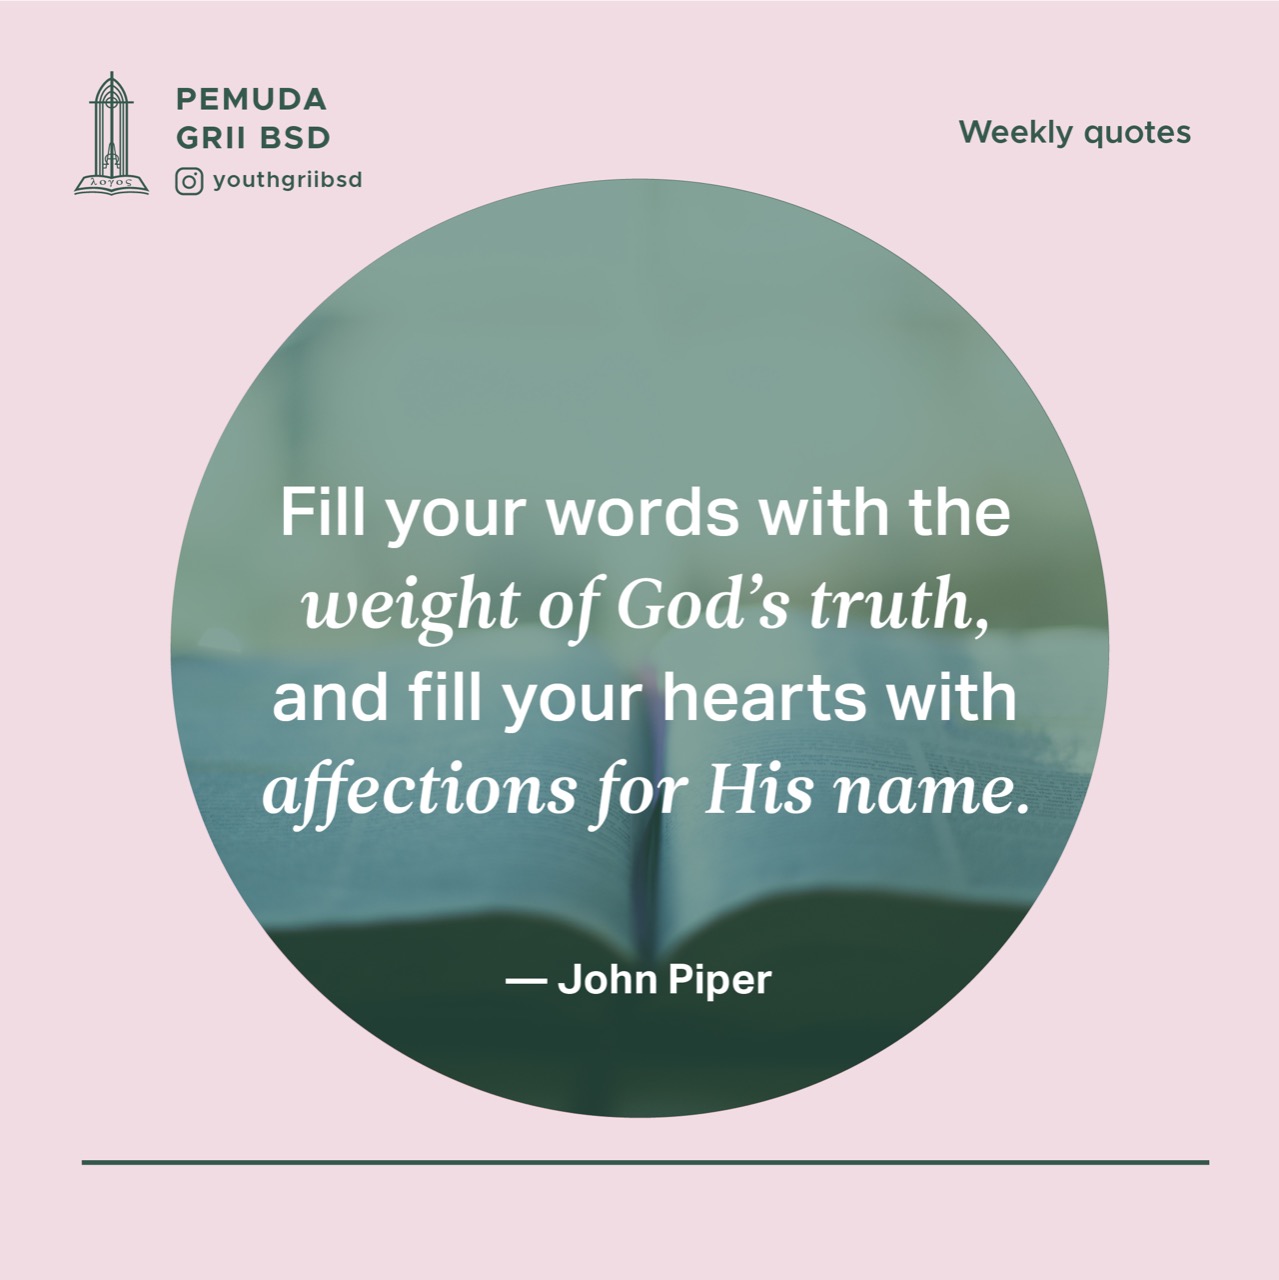 Fill your words with the weight of God's truth, and fill your hearts with affections for His name